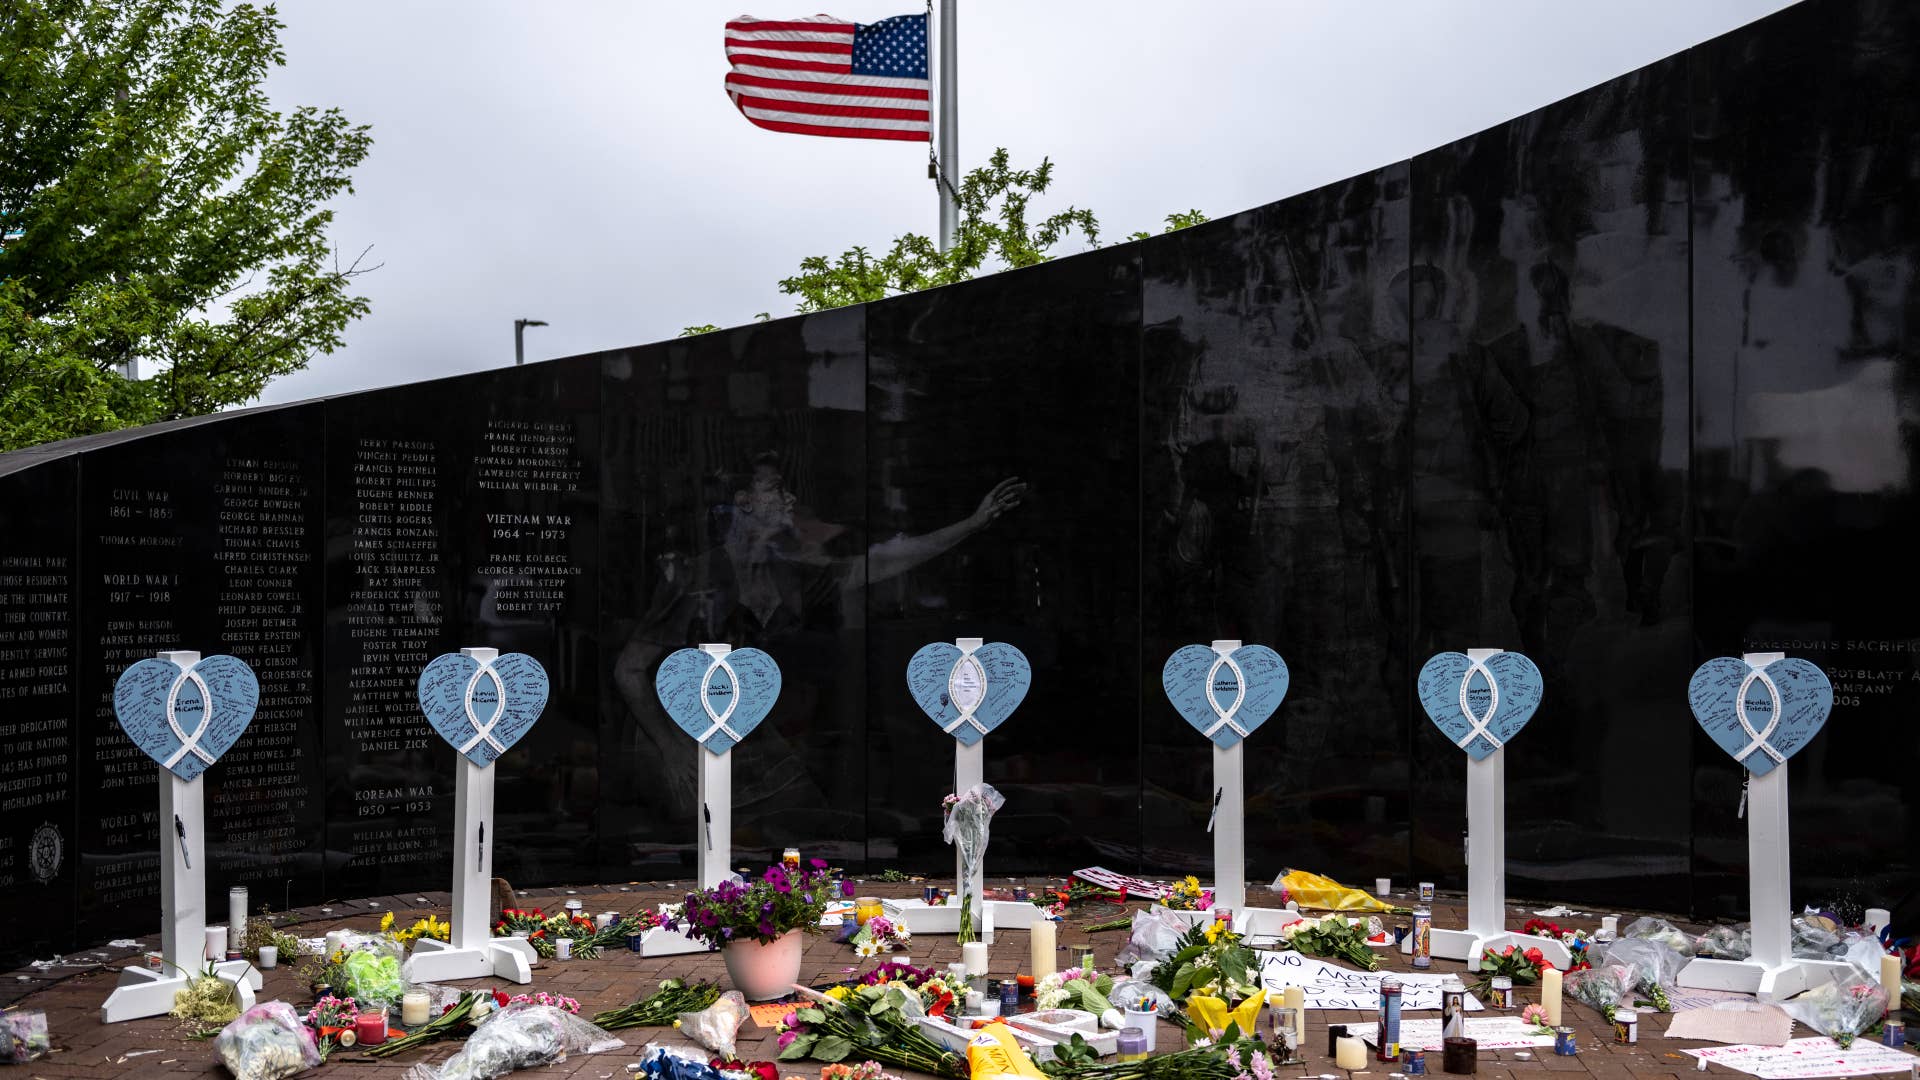 A memorial for Illinois mass shooting victims is pictured